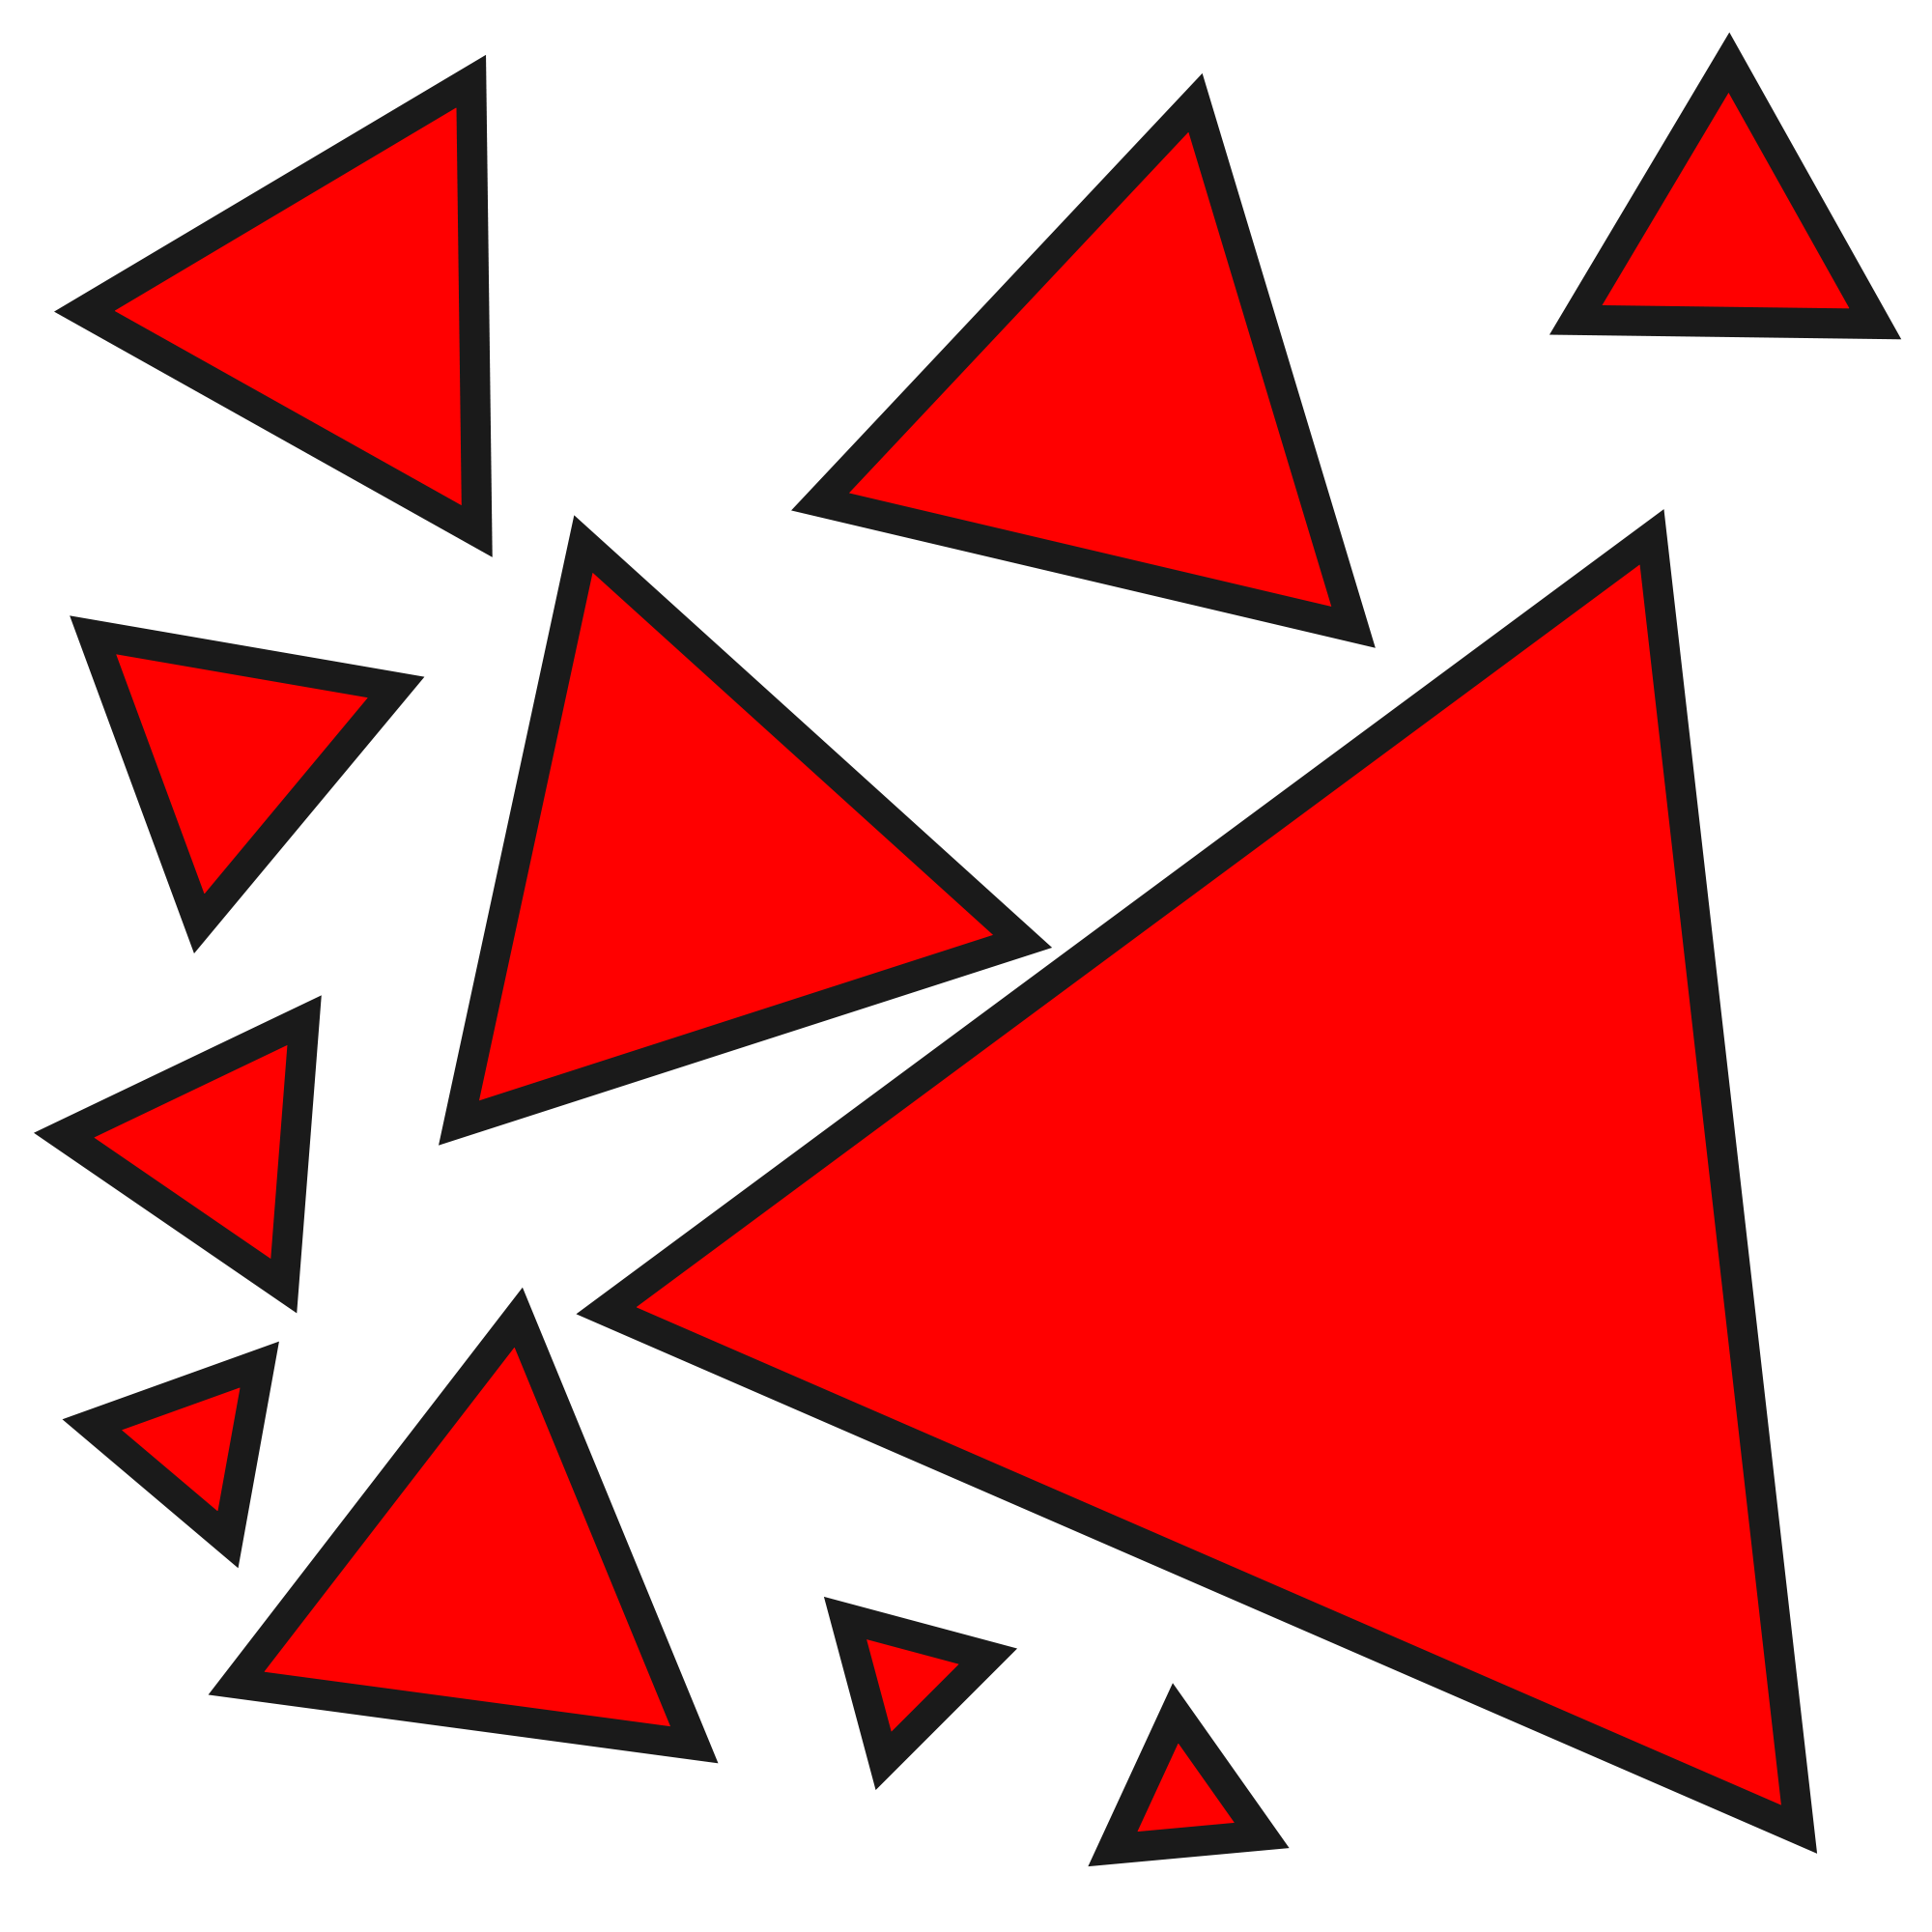 6 of Red Triangles Logo - Red Triangles.svg